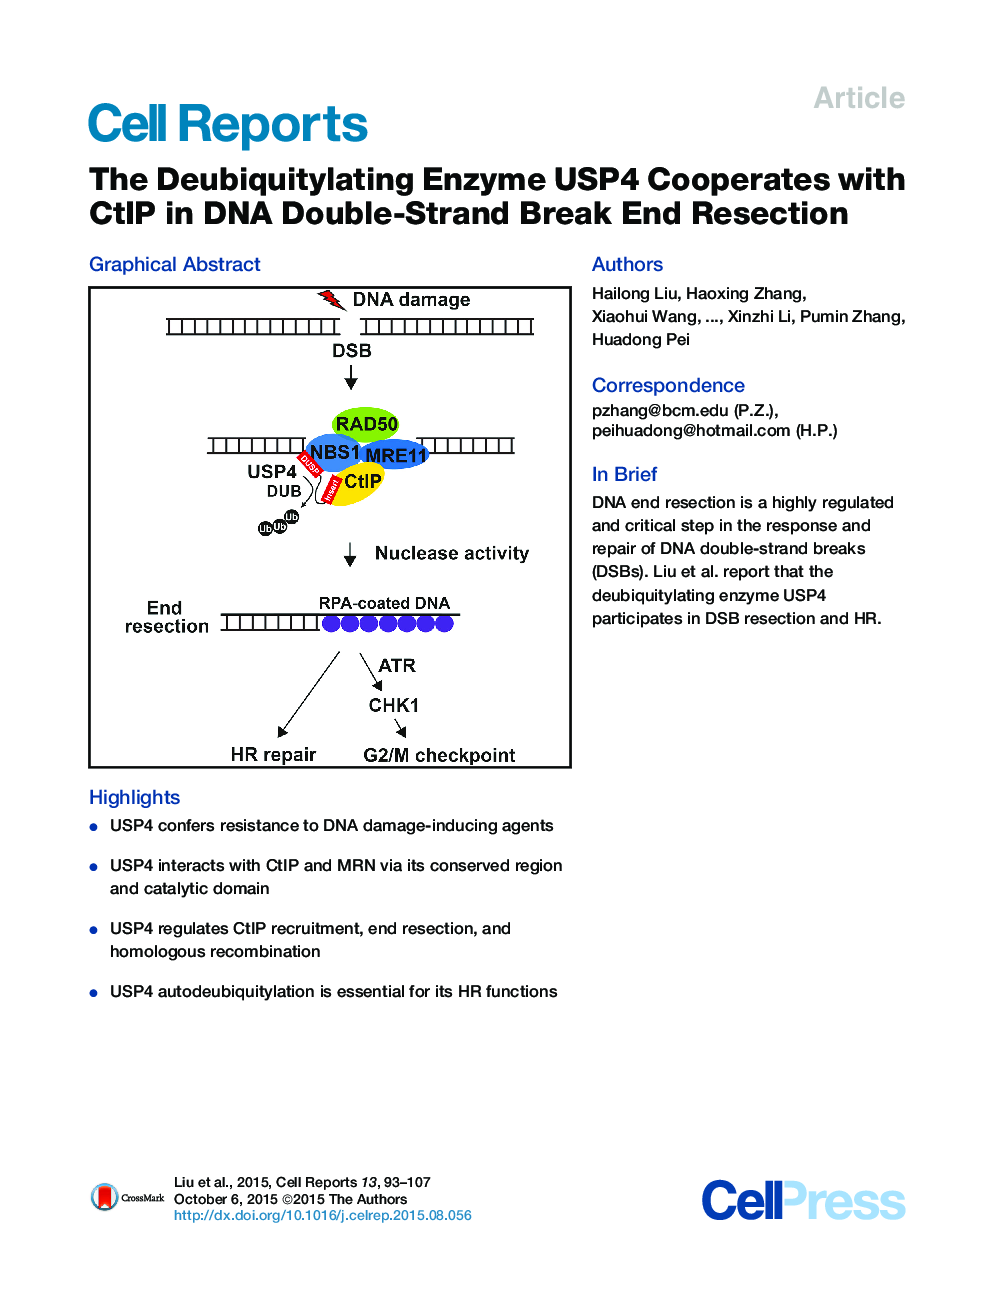 The Deubiquitylating Enzyme USP4 Cooperates with CtIP in DNA Double-Strand Break End Resection 